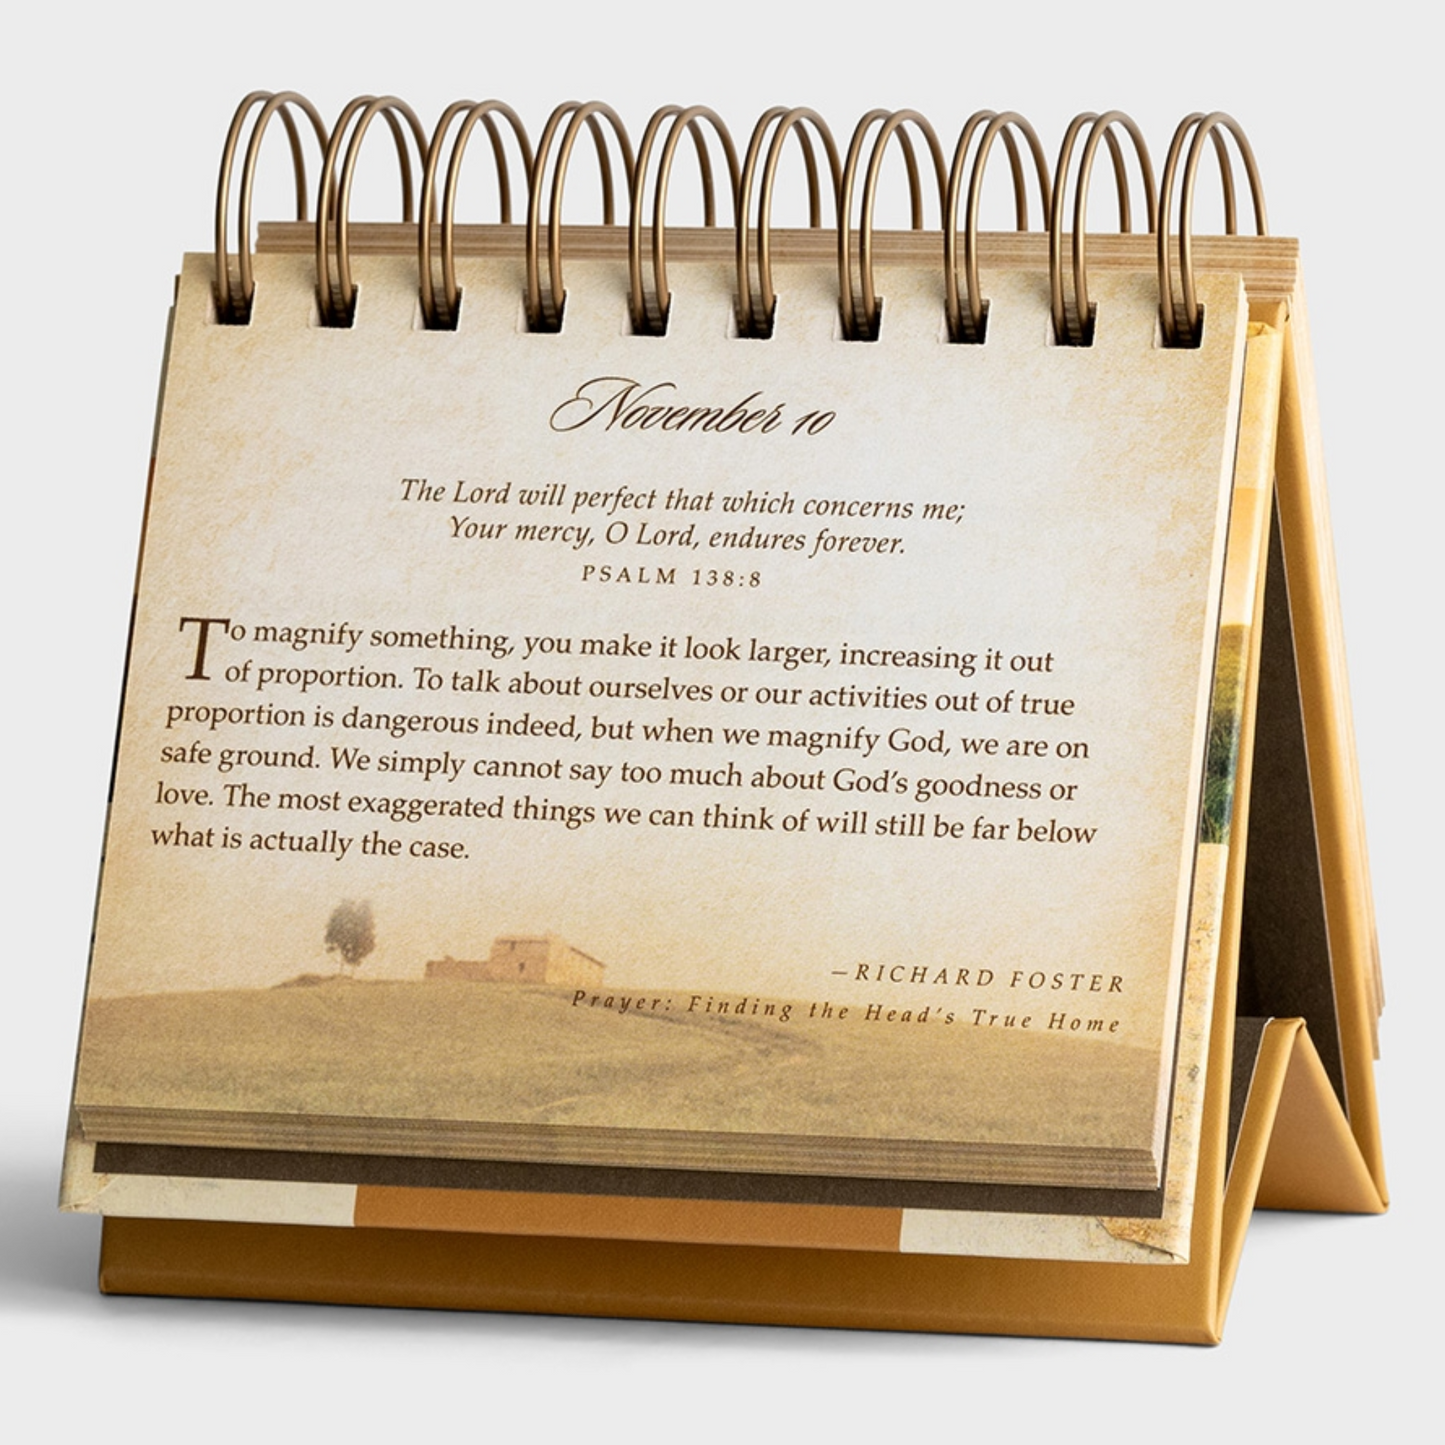 Perpetual Calendar - God's Promises Day by Day (#77872)